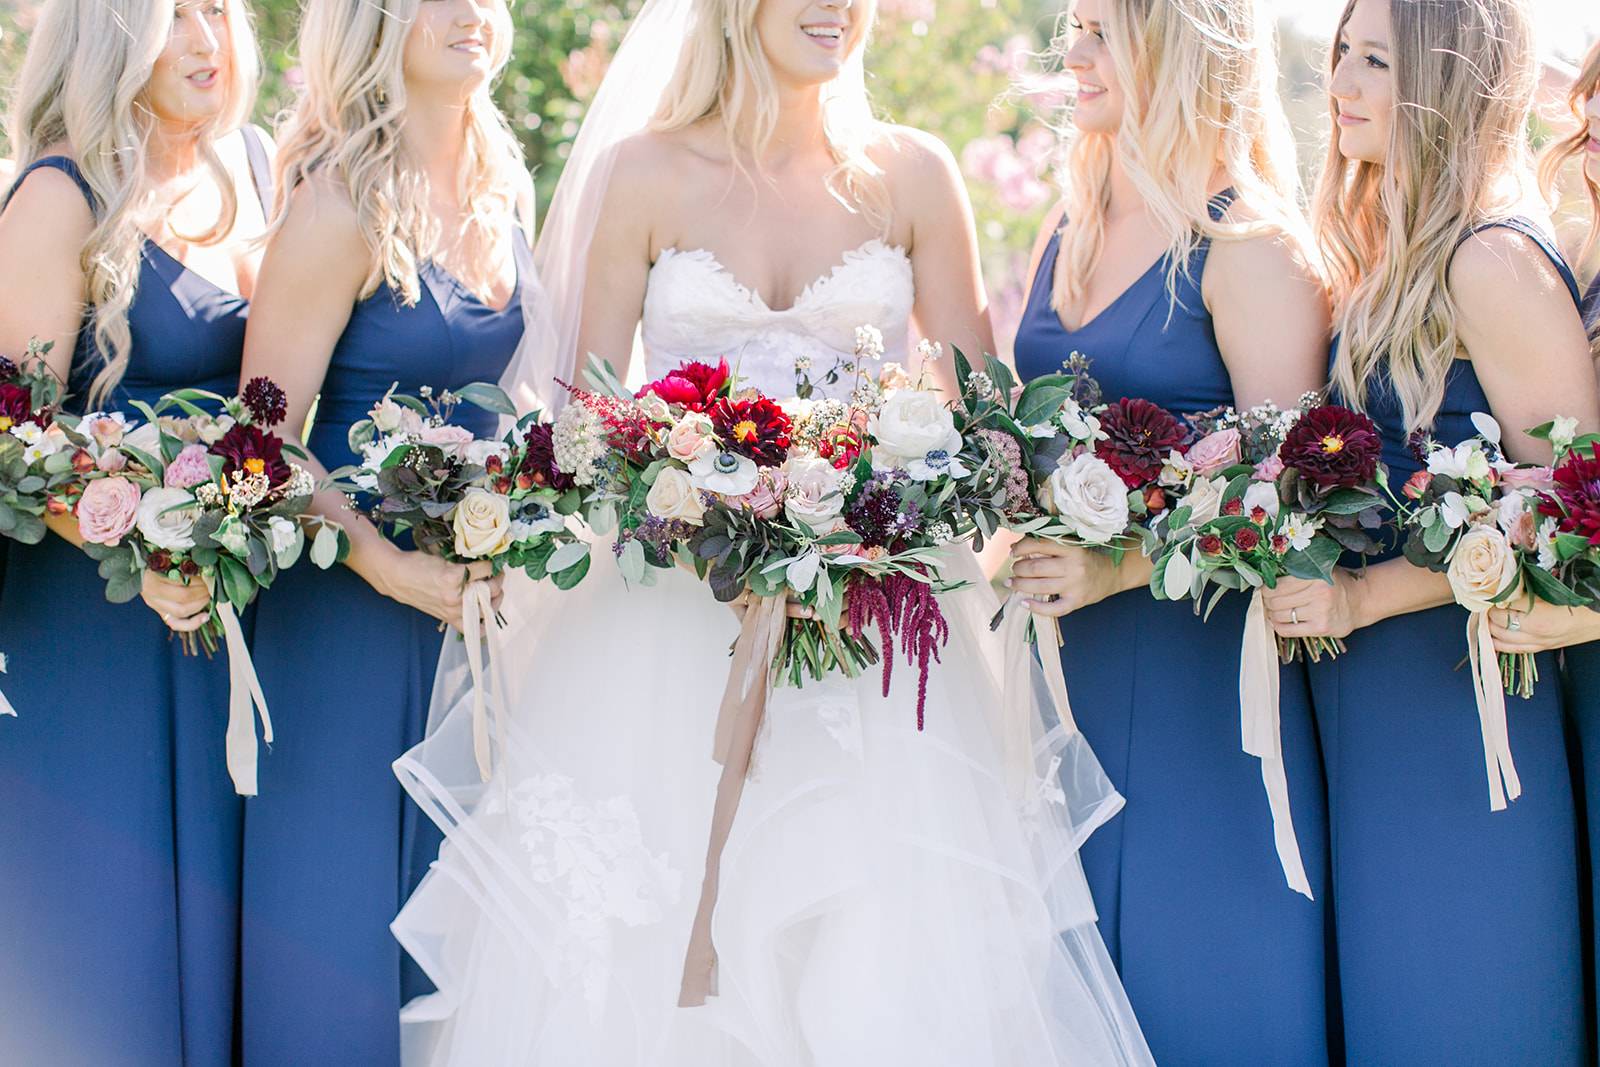 Carly is Standing with Her Bridemaids and Holding April Flowers | The Wedding Standard